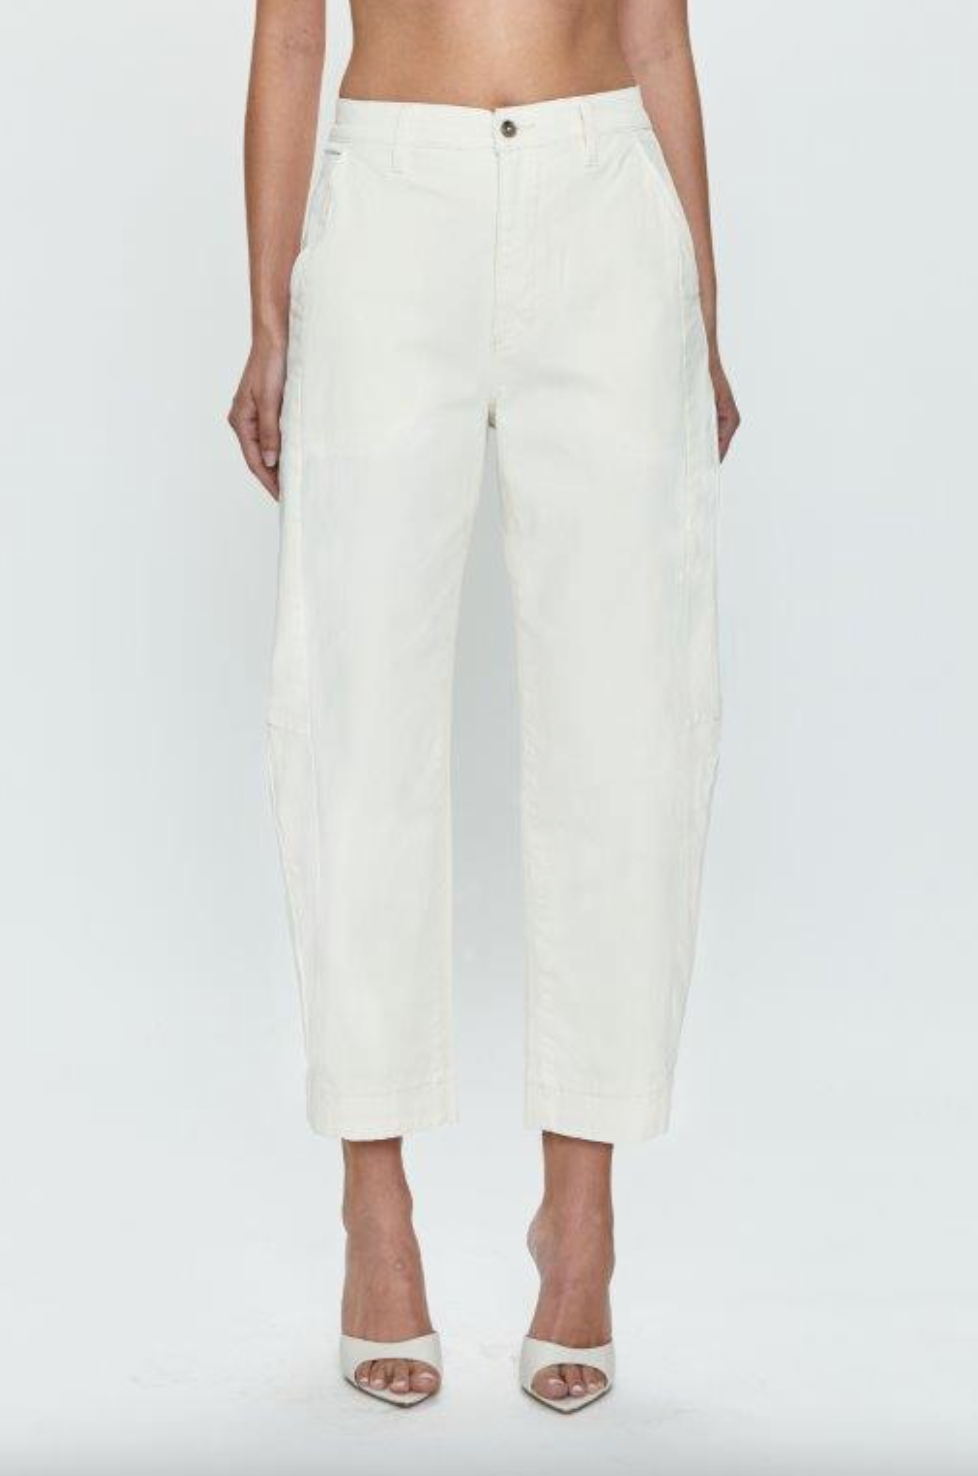 A woman wearing Pistola&#39;s Eli High Rise Arched Trouser, white, cropped, wide-leg pants and white sandals, shown from the waist down against a plain background.